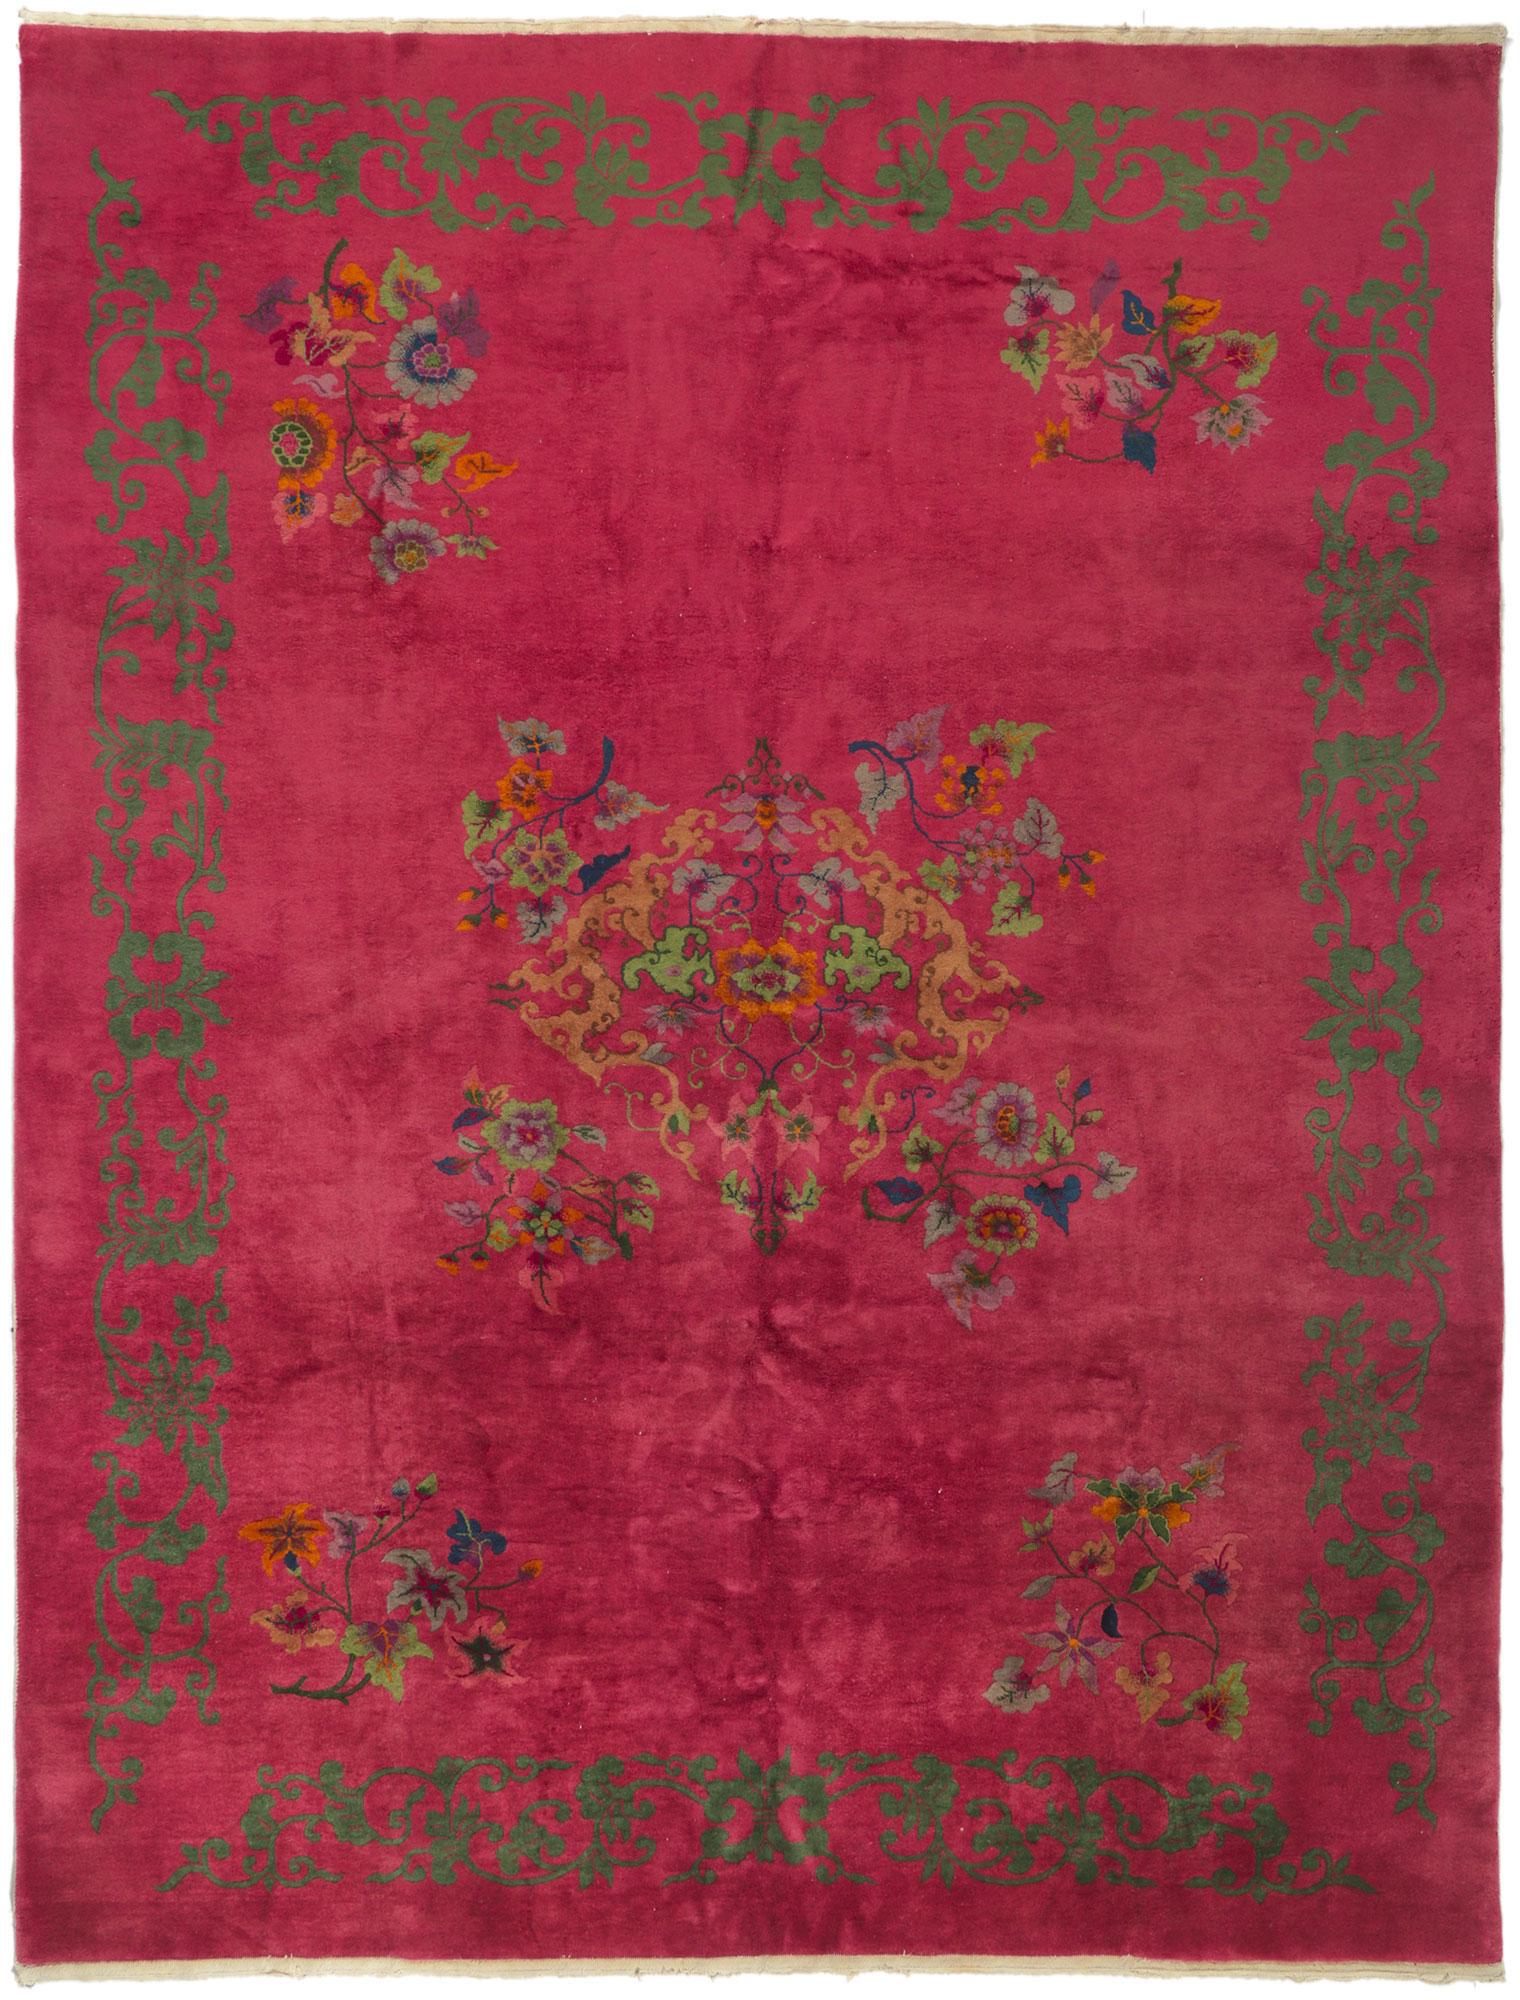 Antique Chinese Art Deco Rug, Sensual Decadence Meets Maximalist Style For Sale 4